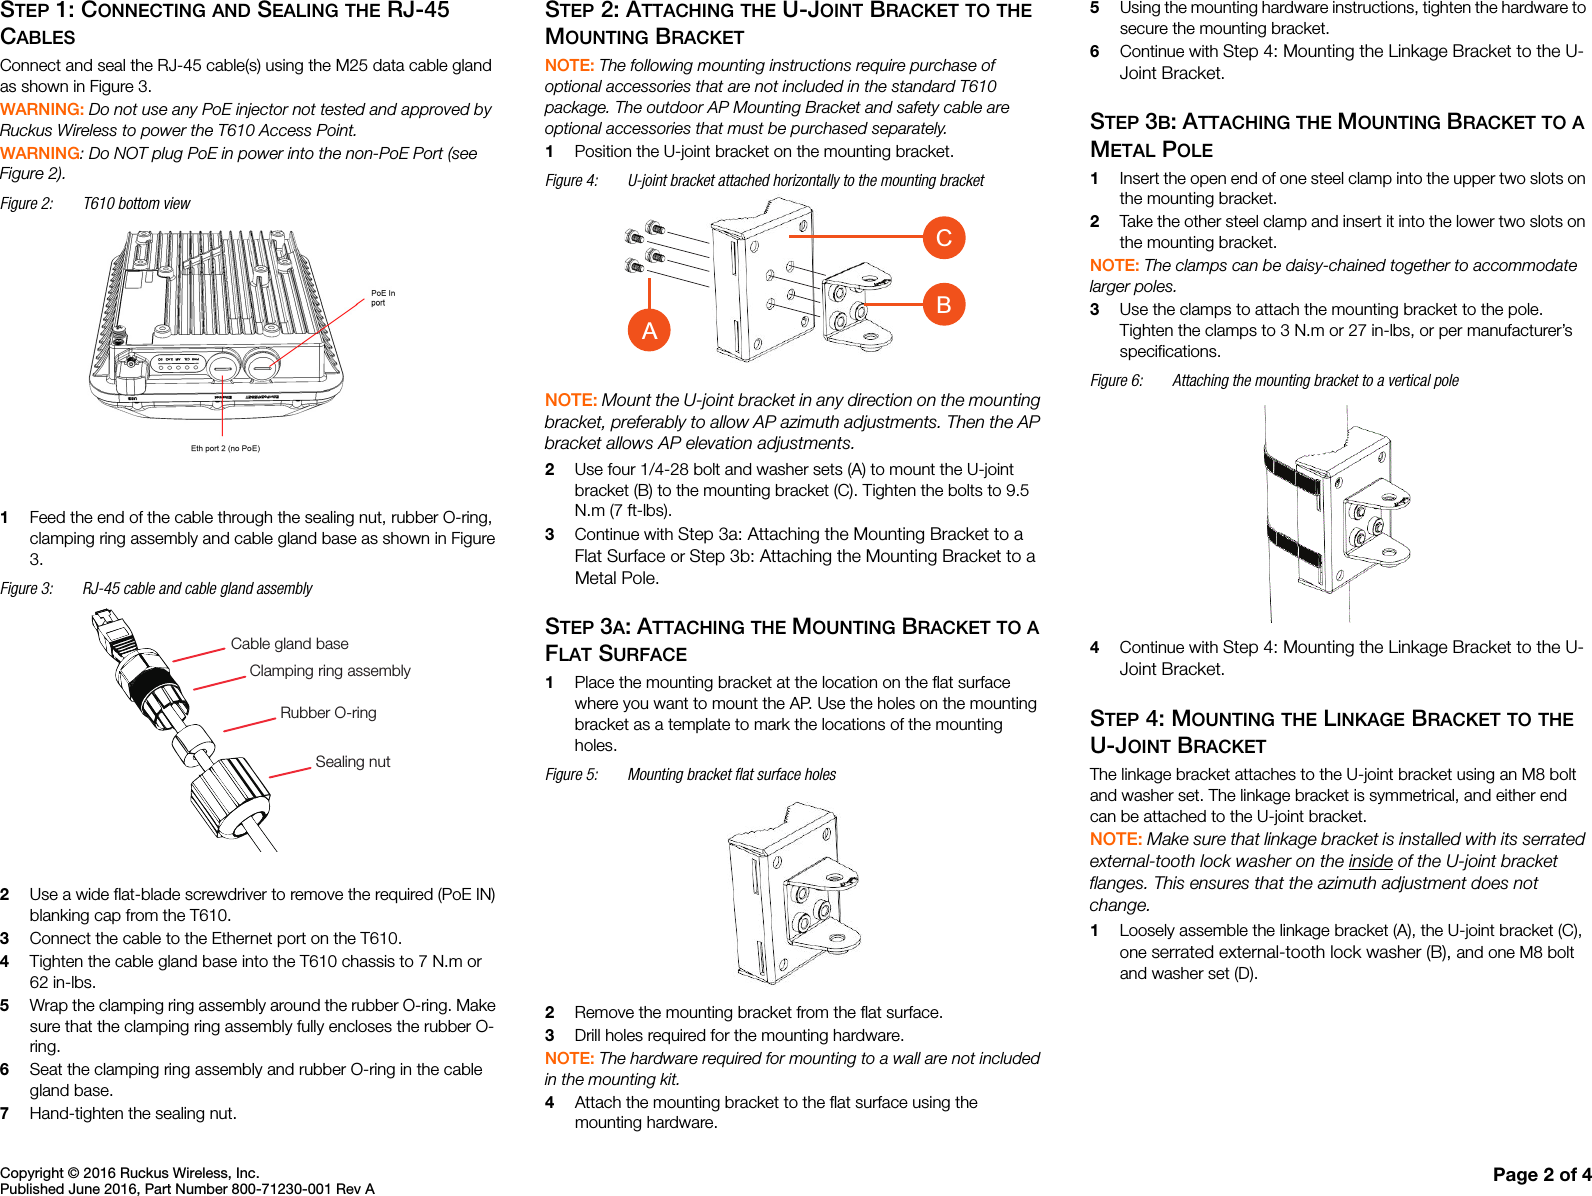 Copyright © 2016 Ruckus Wireless, Inc.Published June 2016, Part Number 800-71230-001 Rev A Page 2 of 4STEP 1: CONNECTING AND SEALING THE RJ-45 CABLESConnect and seal the RJ-45 cable(s) using the M25 data cable gland as shown in Figure 3.WARNING: Do not use any PoE injector not tested and approved by Ruckus Wireless to power the T610 Access Point. WARNING: Do NOT plug PoE in power into the non-PoE Port (see Figure 2).Figure 2: T610 bottom view 1Feed the end of the cable through the sealing nut, rubber O-ring, clamping ring assembly and cable gland base as shown in Figure 3.Figure 3: RJ-45 cable and cable gland assembly2Use a wide flat-blade screwdriver to remove the required (PoE IN) blanking cap from the T610.3Connect the cable to the Ethernet port on the T610. 4Tighten the cable gland base into the T610 chassis to 7 N.m or 62 in-lbs.5Wrap the clamping ring assembly around the rubber O-ring. Make sure that the clamping ring assembly fully encloses the rubber O-ring.6Seat the clamping ring assembly and rubber O-ring in the cable gland base.7Hand-tighten the sealing nut. STEP 2: ATTACHING THE U-JOINT BRACKET TO THE MOUNTING BRACKETNOTE: The following mounting instructions require purchase of optional accessories that are not included in the standard T610 package. The outdoor AP Mounting Bracket and safety cable are optional accessories that must be purchased separately. 1Position the U-joint bracket on the mounting bracket. Figure 4: U-joint bracket attached horizontally to the mounting bracketNOTE: Mount the U-joint bracket in any direction on the mounting bracket, preferably to allow AP azimuth adjustments. Then the AP bracket allows AP elevation adjustments.2Use four 1/4-28 bolt and washer sets (A) to mount the U-joint bracket (B) to the mounting bracket (C). Tighten the bolts to 9.5 N.m (7 ft-lbs).3Continue with Step 3a: Attaching the Mounting Bracket to a Flat Surface or Step 3b: Attaching the Mounting Bracket to a Metal Pole.STEP 3A: ATTACHING THE MOUNTING BRACKET TO A FLAT SURFACE1Place the mounting bracket at the location on the flat surface where you want to mount the AP. Use the holes on the mounting bracket as a template to mark the locations of the mounting holes.Figure 5: Mounting bracket flat surface holes 2Remove the mounting bracket from the flat surface.3Drill holes required for the mounting hardware.NOTE: The hardware required for mounting to a wall are not included in the mounting kit. 4Attach the mounting bracket to the flat surface using the mounting hardware.5Using the mounting hardware instructions, tighten the hardware to secure the mounting bracket.6Continue with Step 4: Mounting the Linkage Bracket to the U-Joint Bracket.STEP 3B: ATTACHING THE MOUNTING BRACKET TO A METAL POLE1Insert the open end of one steel clamp into the upper two slots on the mounting bracket.2Take the other steel clamp and insert it into the lower two slots on the mounting bracket.NOTE: The clamps can be daisy-chained together to accommodate larger poles. 3Use the clamps to attach the mounting bracket to the pole. Tighten the clamps to 3 N.m or 27 in-lbs, or per manufacturer’s specifications.Figure 6: Attaching the mounting bracket to a vertical pole4Continue with Step 4: Mounting the Linkage Bracket to the U-Joint Bracket.STEP 4: MOUNTING THE LINKAGE BRACKET TO THE U-JOINT BRACKETThe linkage bracket attaches to the U-joint bracket using an M8 bolt and washer set. The linkage bracket is symmetrical, and either end can be attached to the U-joint bracket. NOTE: Make sure that linkage bracket is installed with its serrated external-tooth lock washer on the inside of the U-joint bracket flanges. This ensures that the azimuth adjustment does not change.1Loosely assemble the linkage bracket (A), the U-joint bracket (C), one serrated external-tooth lock washer (B), and one M8 bolt and washer set (D). Cable gland baseClamping ring assemblyRubber O-ringSealing nutCBA